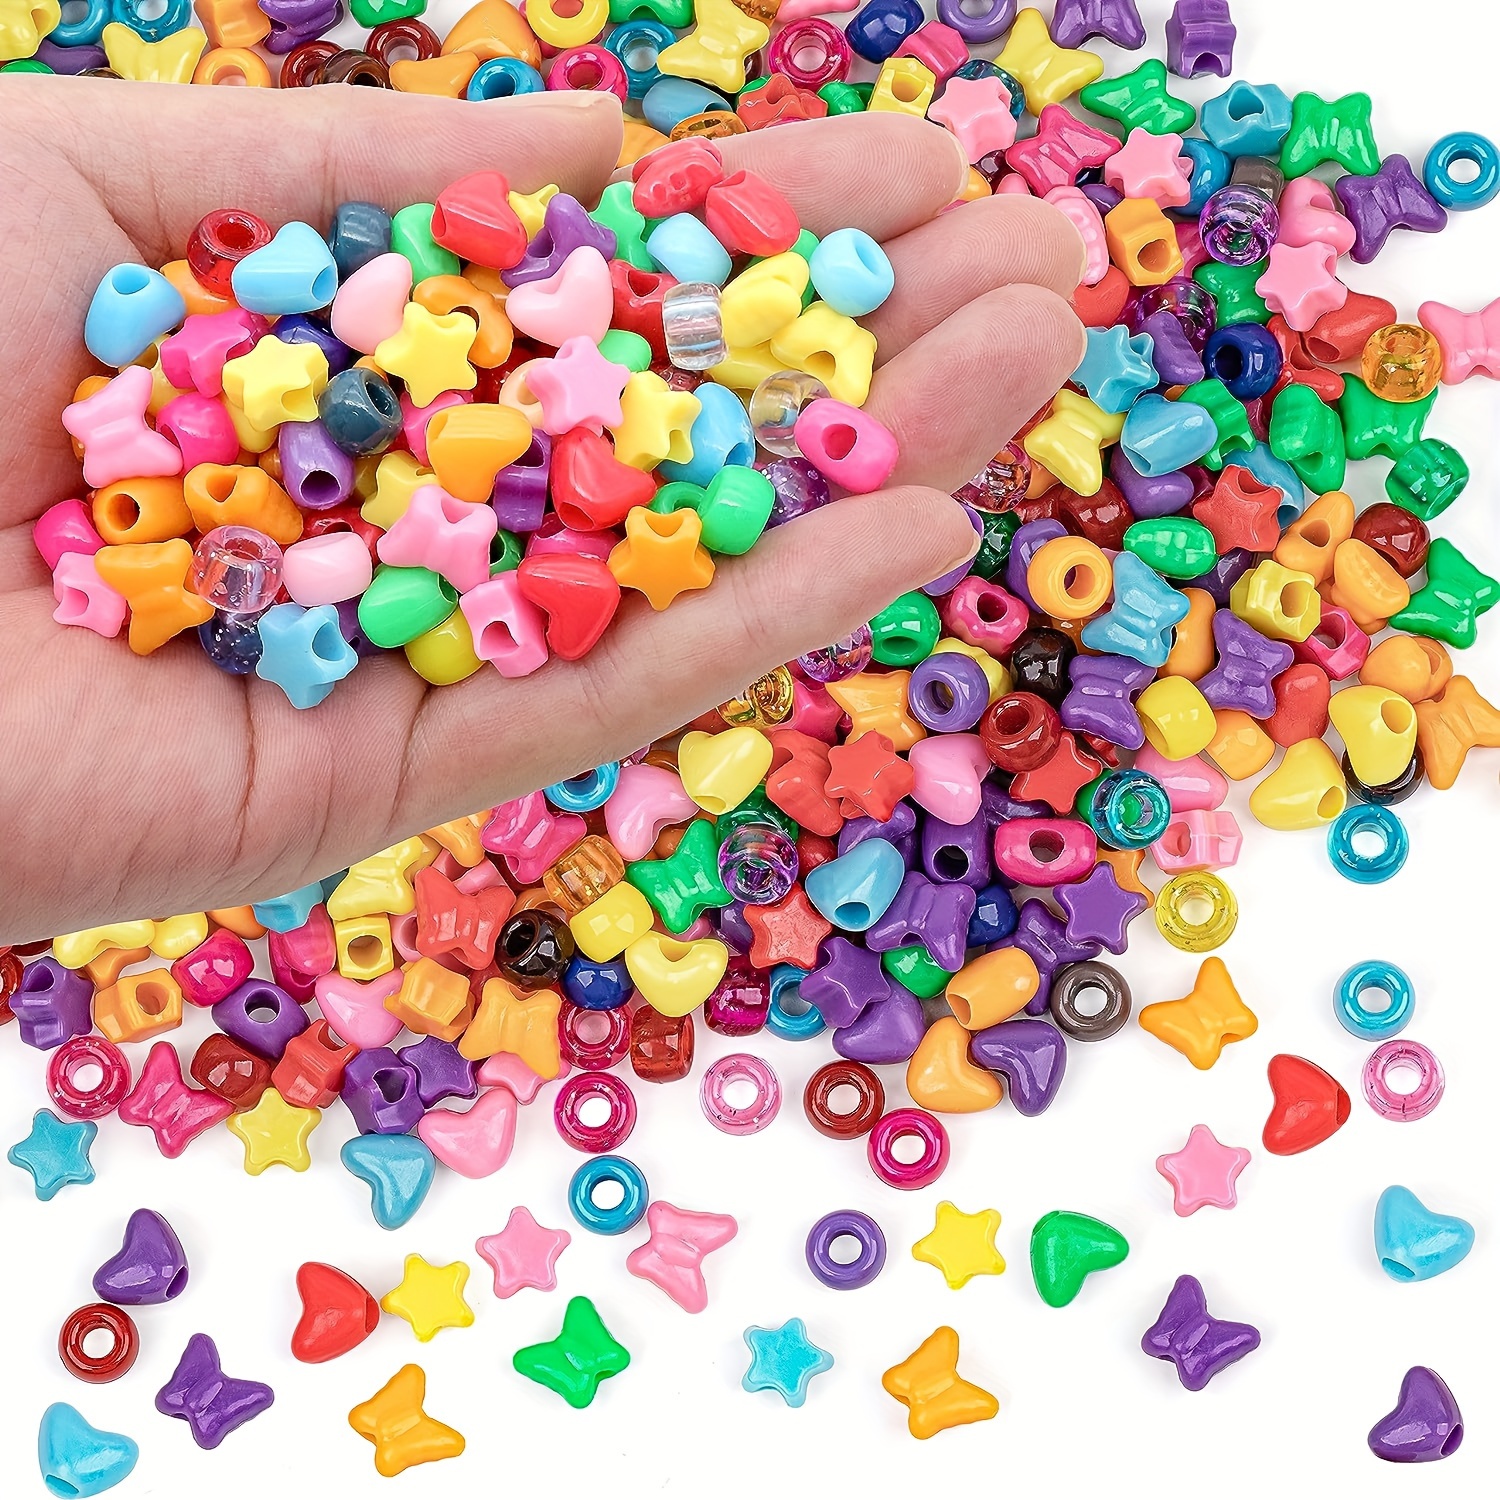  1100pcs Pony Beads,Friendship Bracelet Beads Colored,Beads for  Jewelry Making,Hair Beads,Beads for Bracelets Making,Beads for Crafts,Pony  Beads Bulk Kandi Beads Cute Small Beads